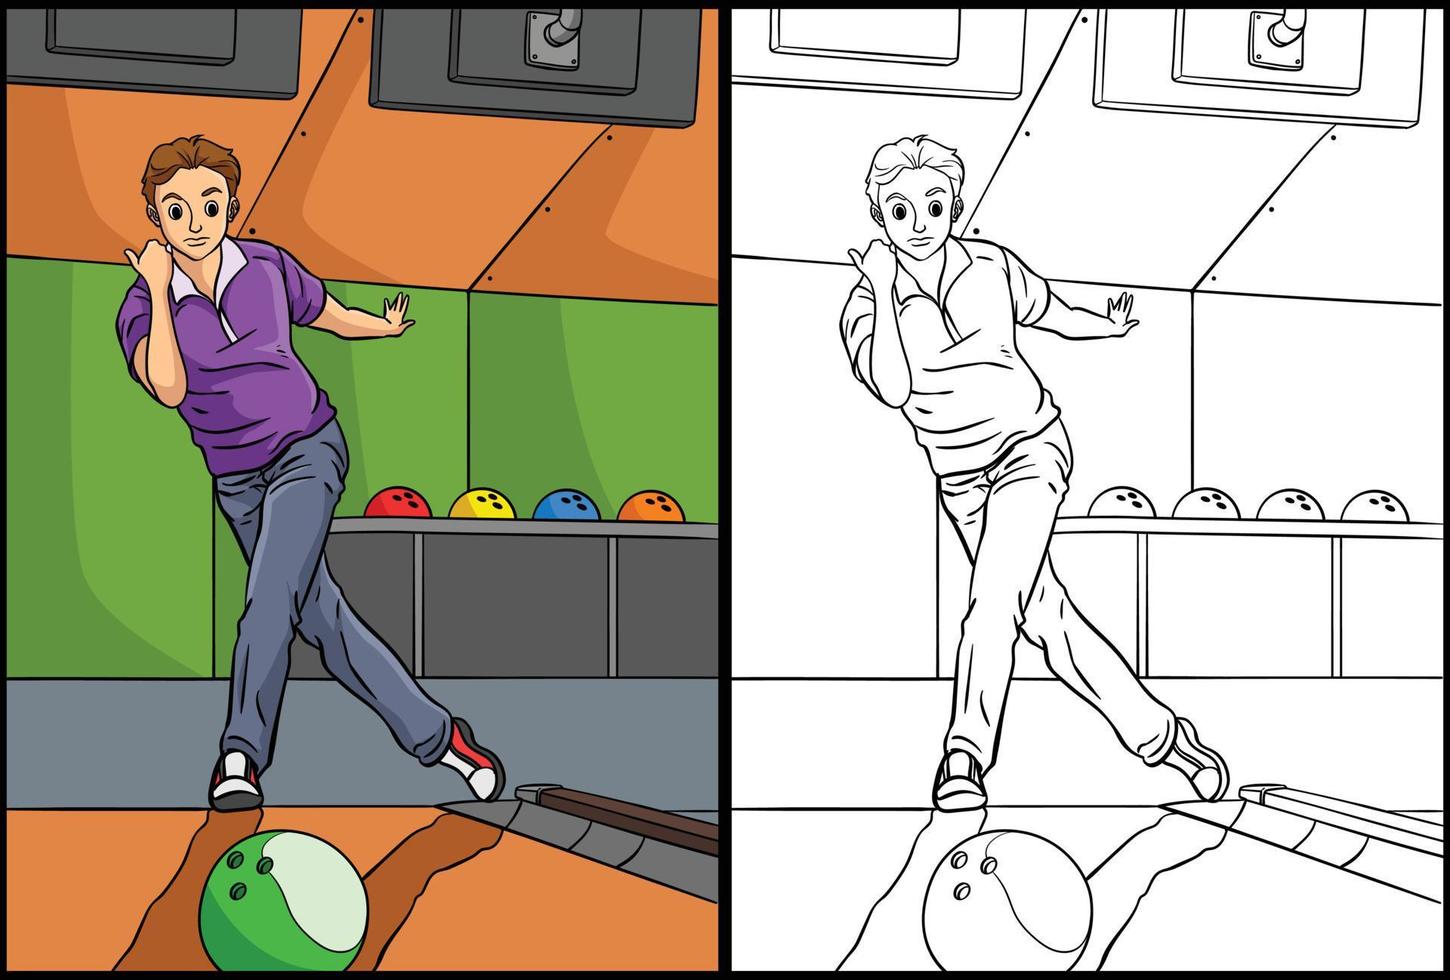 Bowling Coloring Page Colored Illustration vector